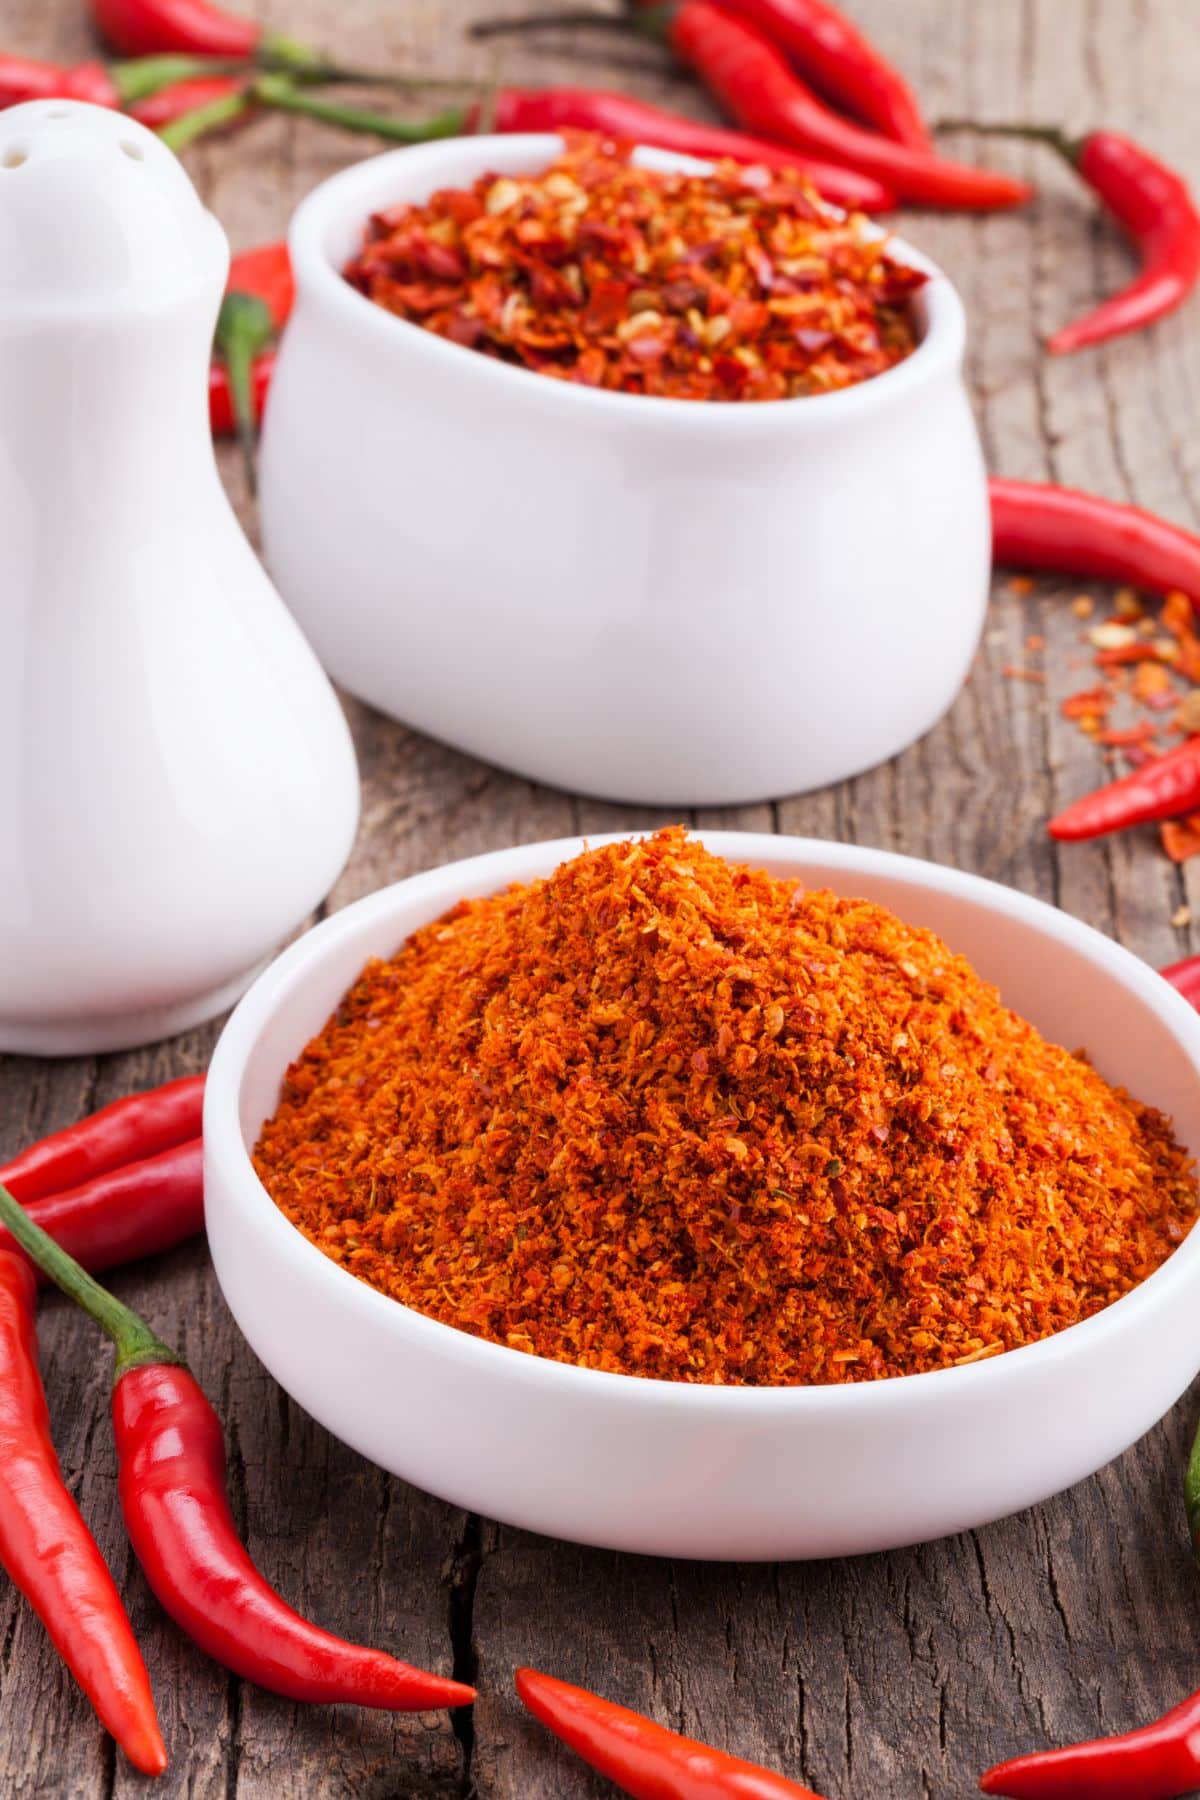 Bowl of chili powder with fresh chilis on wooden surface.